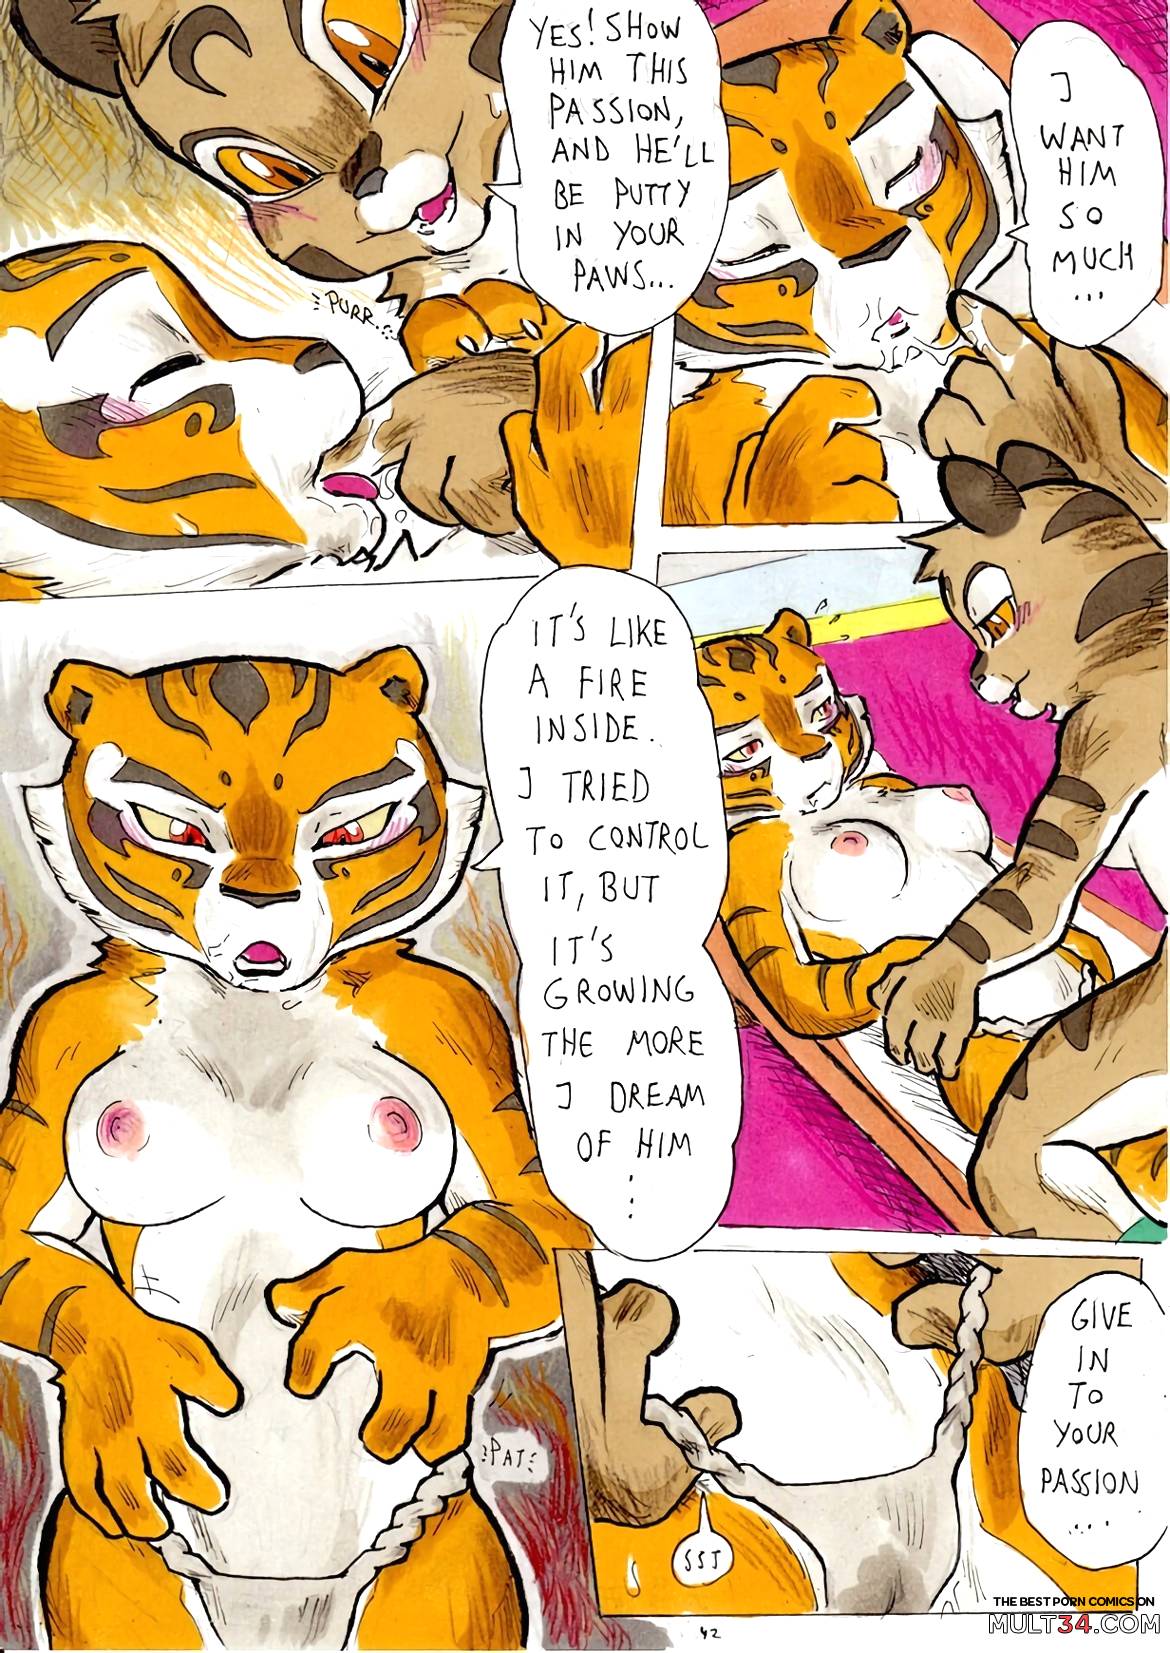 Better Late Than Never Porn Comic